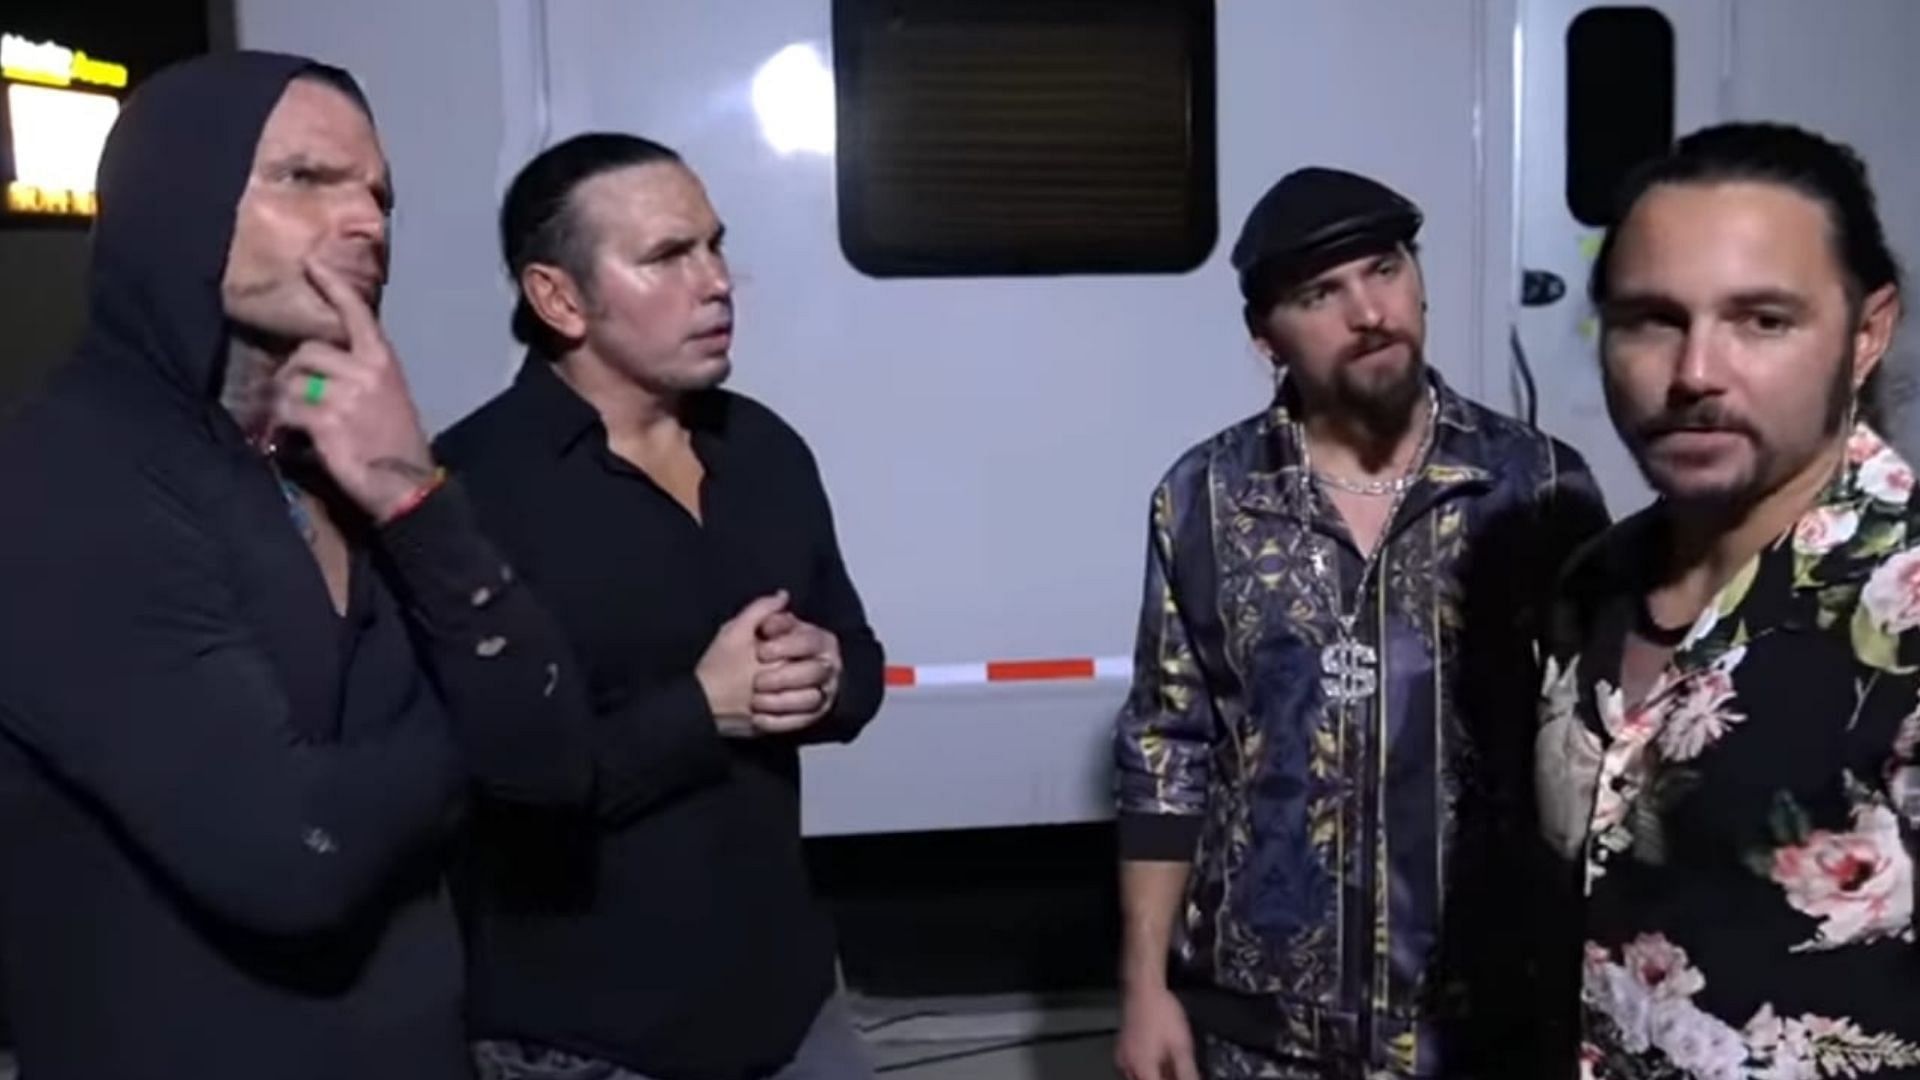 The Hardy Boyz could renew their rivalry with the Bucks in AEW